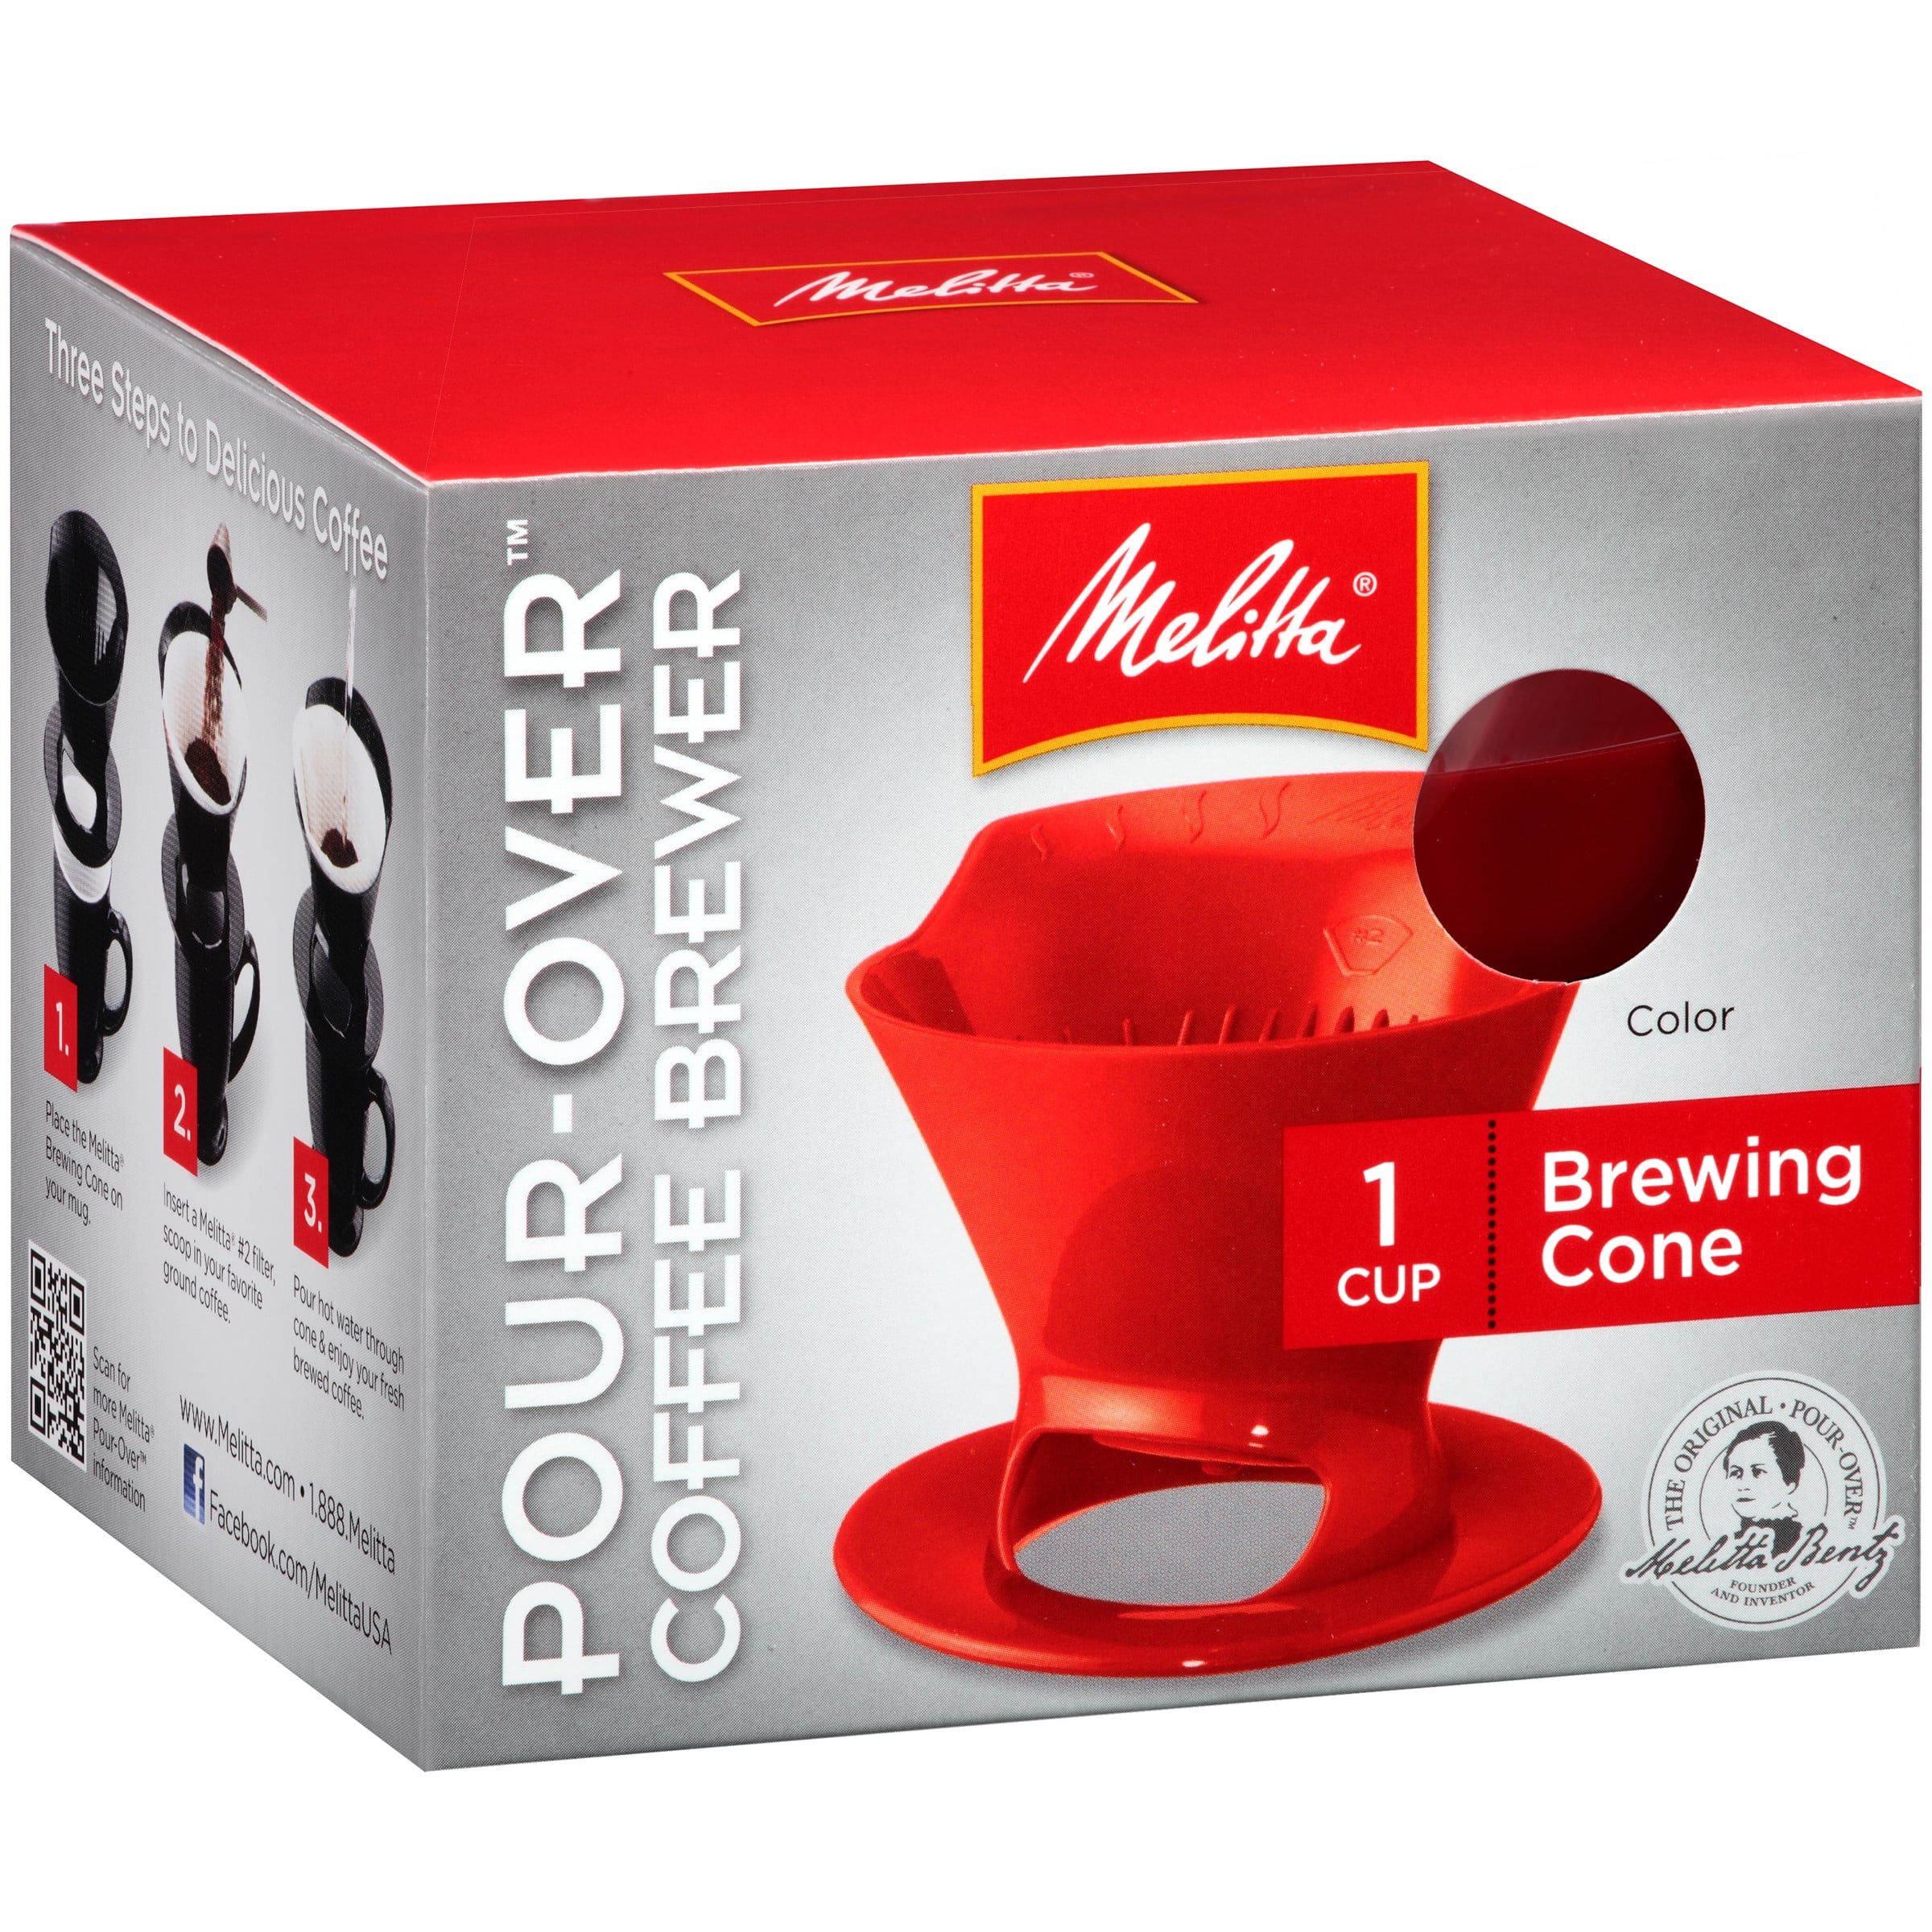 2 Cone Filter CoffeeMaker Choice Of 5 Colors PERFECT BREW Style NEW Melitta No 